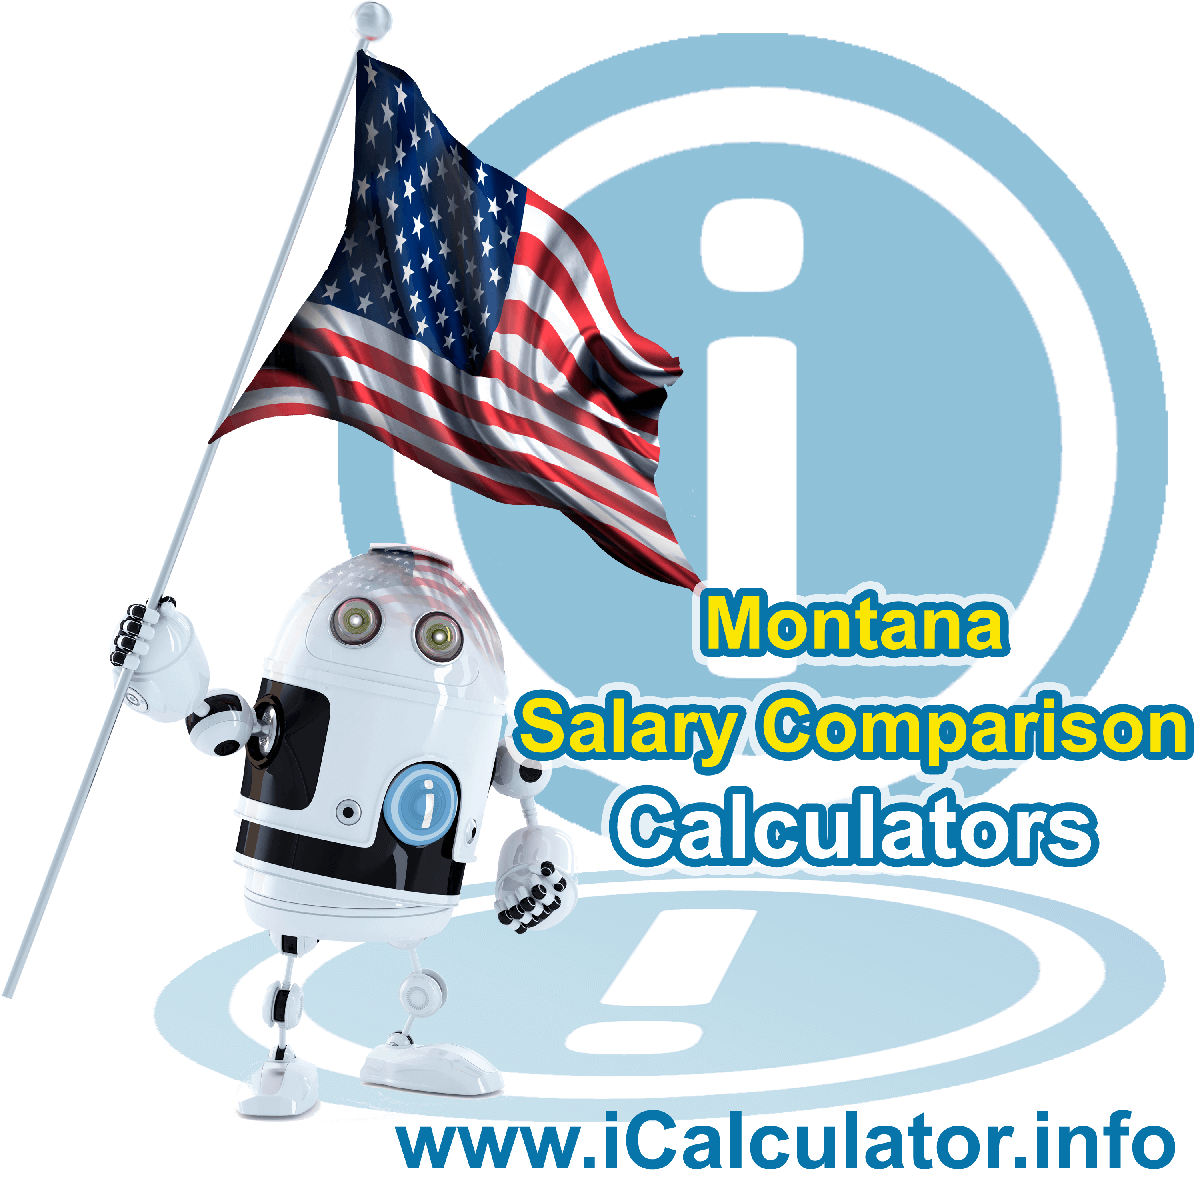 Montana Salary Comparison Calculator 2024 | iCalculator™ | The Montana Salary Comparison Calculator allows you to quickly calculate and compare upto 6 salaries in Montana or compare with other states for the 2024 tax year and historical tax years. 